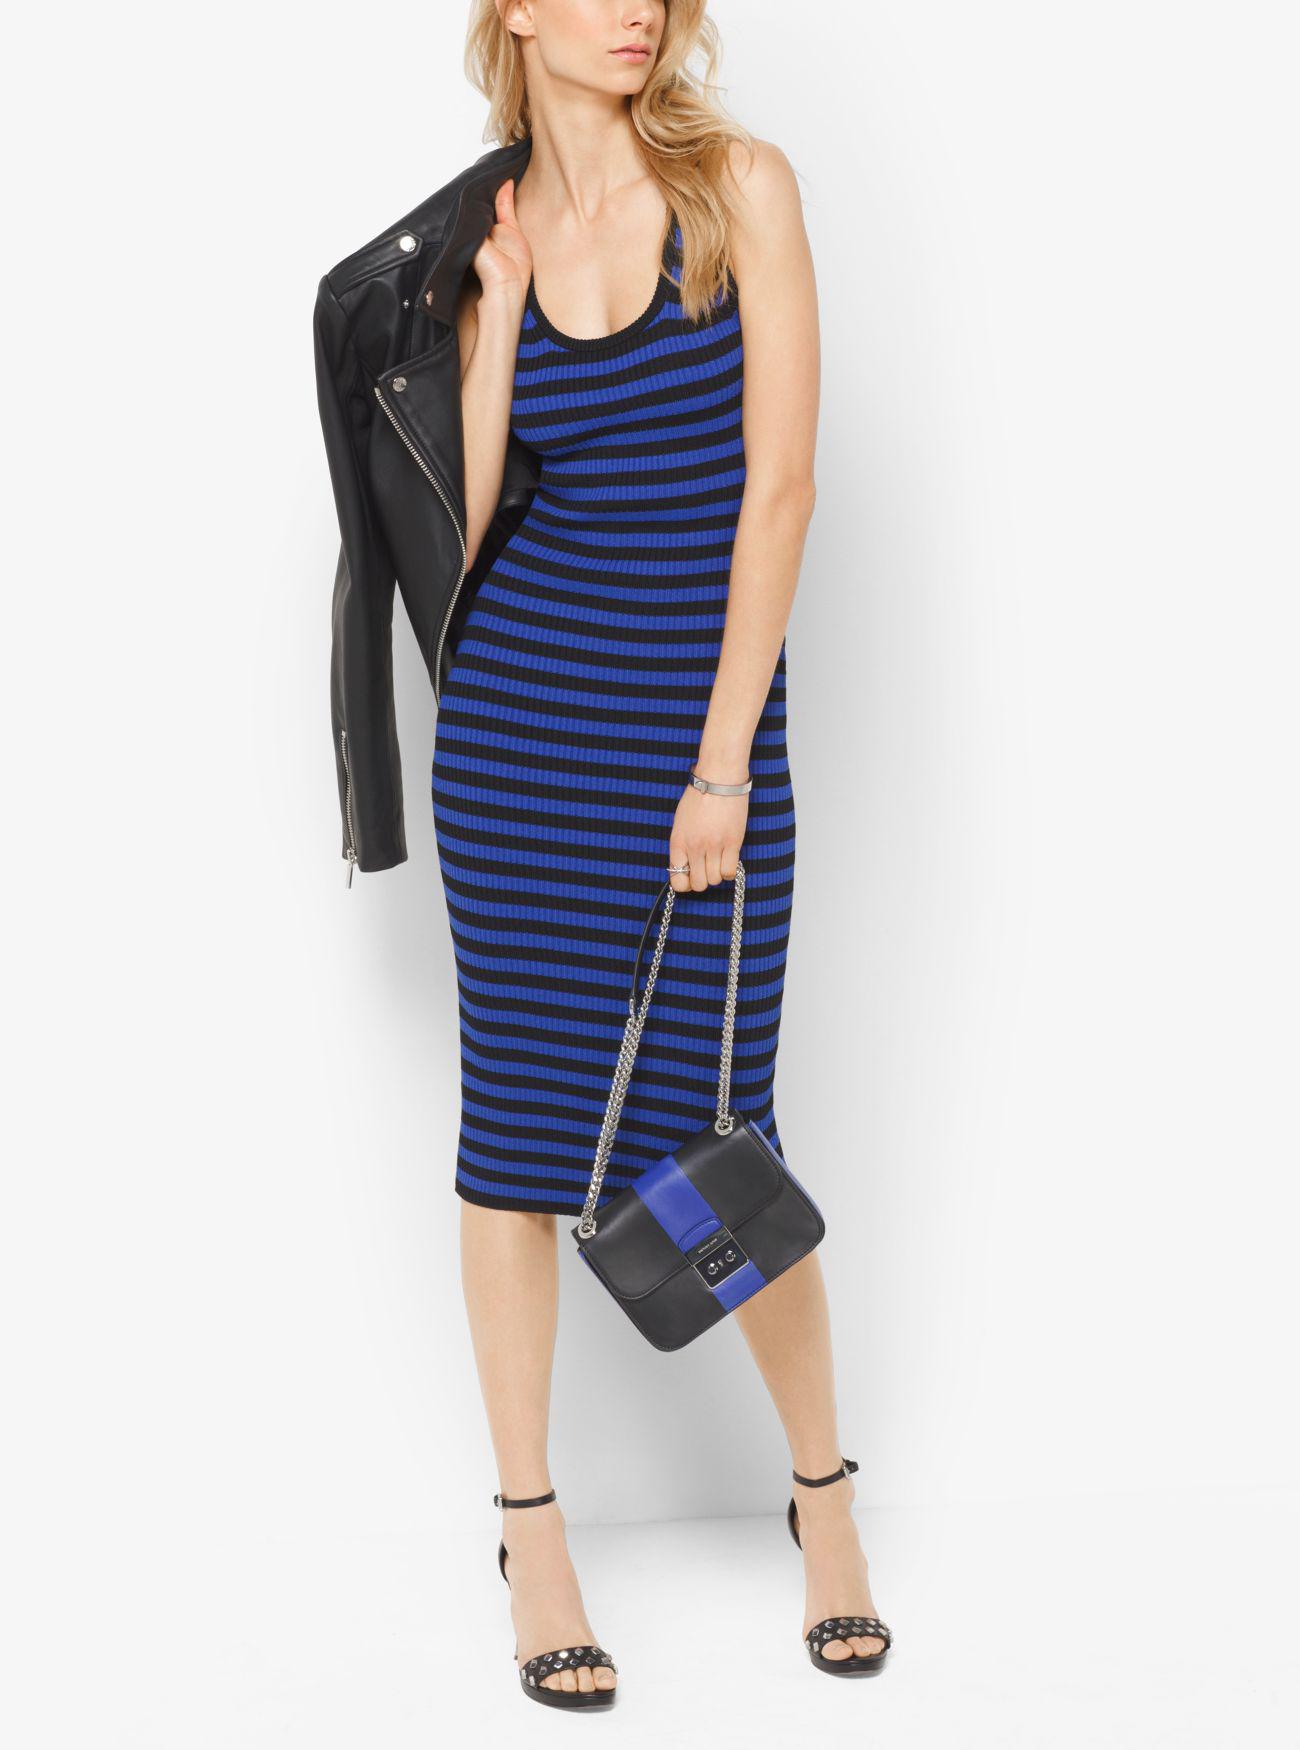 Michael Kors Leather Striped Ribbed Tank Dress in Blue - Lyst